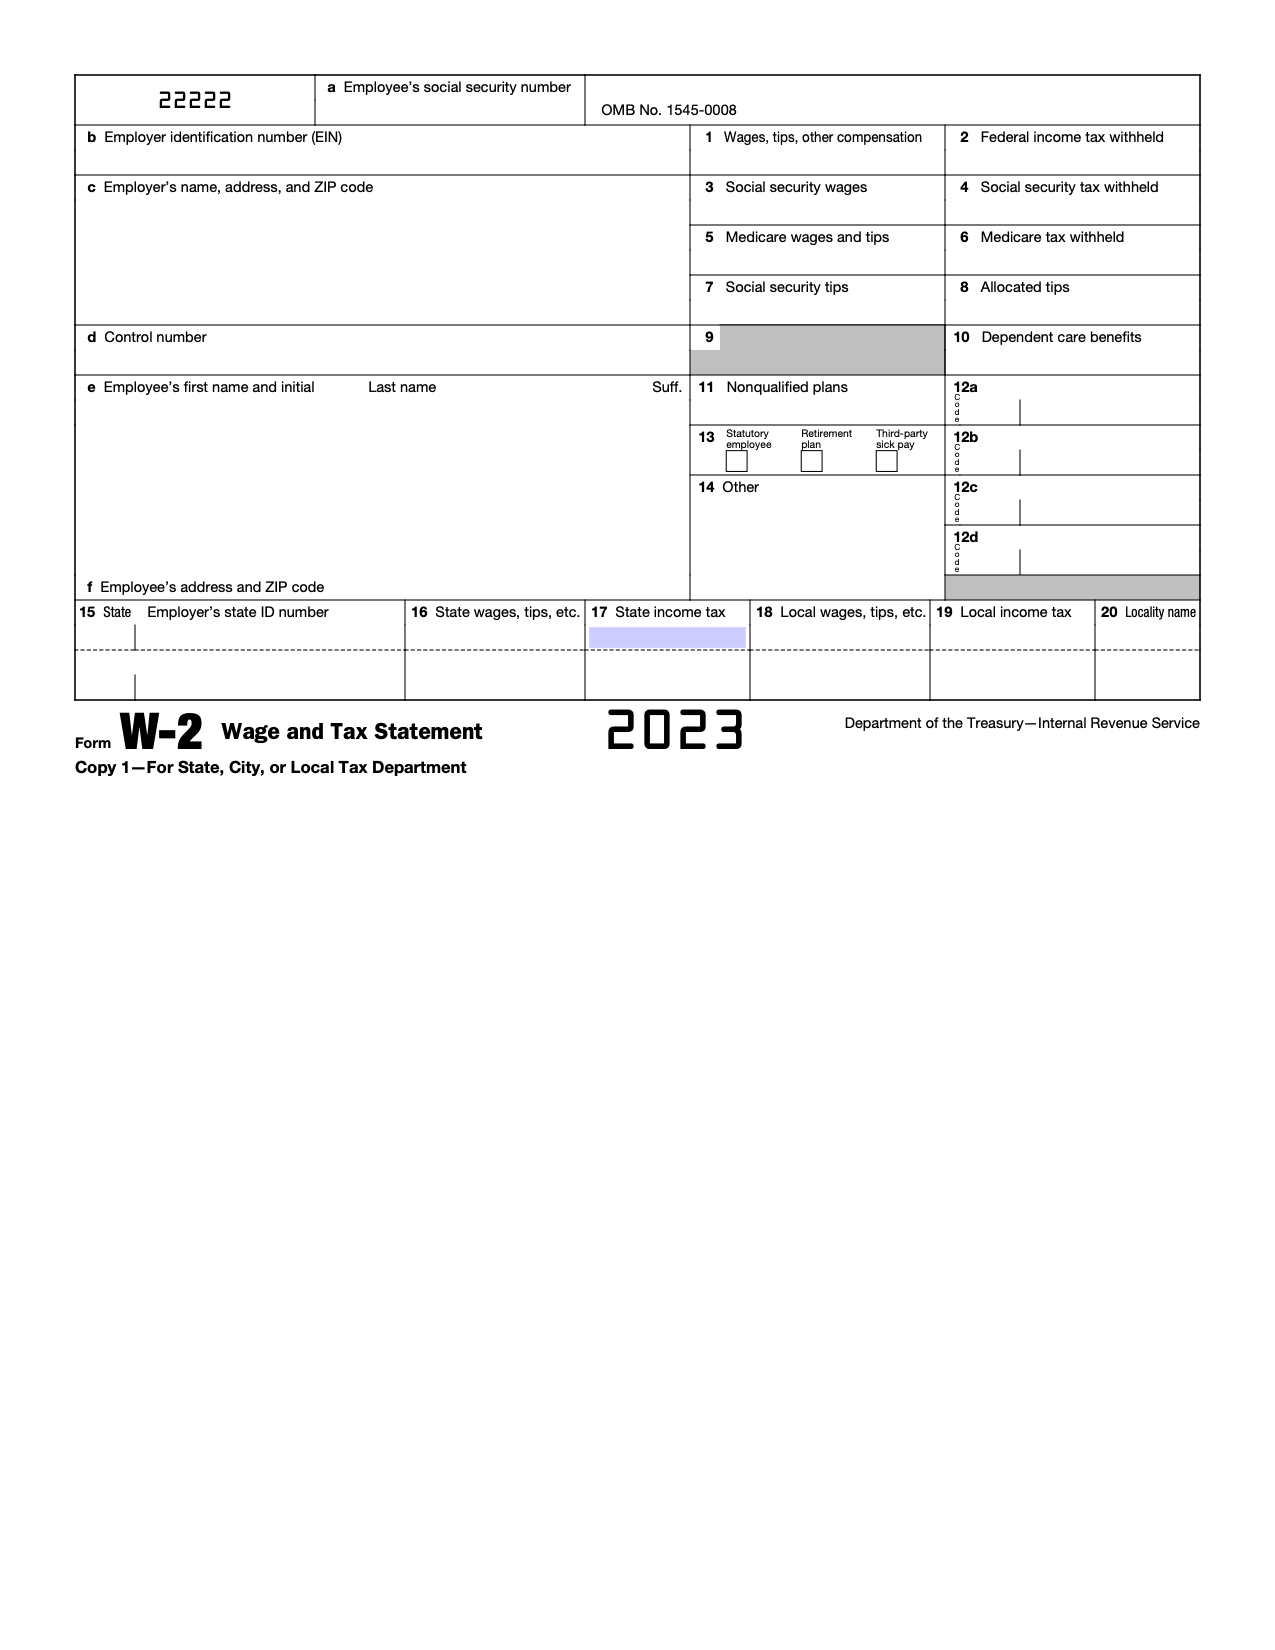 Free Irs Form W-2 | Wage And Tax Statement - Pdf – Eforms pertaining to Print W2 Form Online